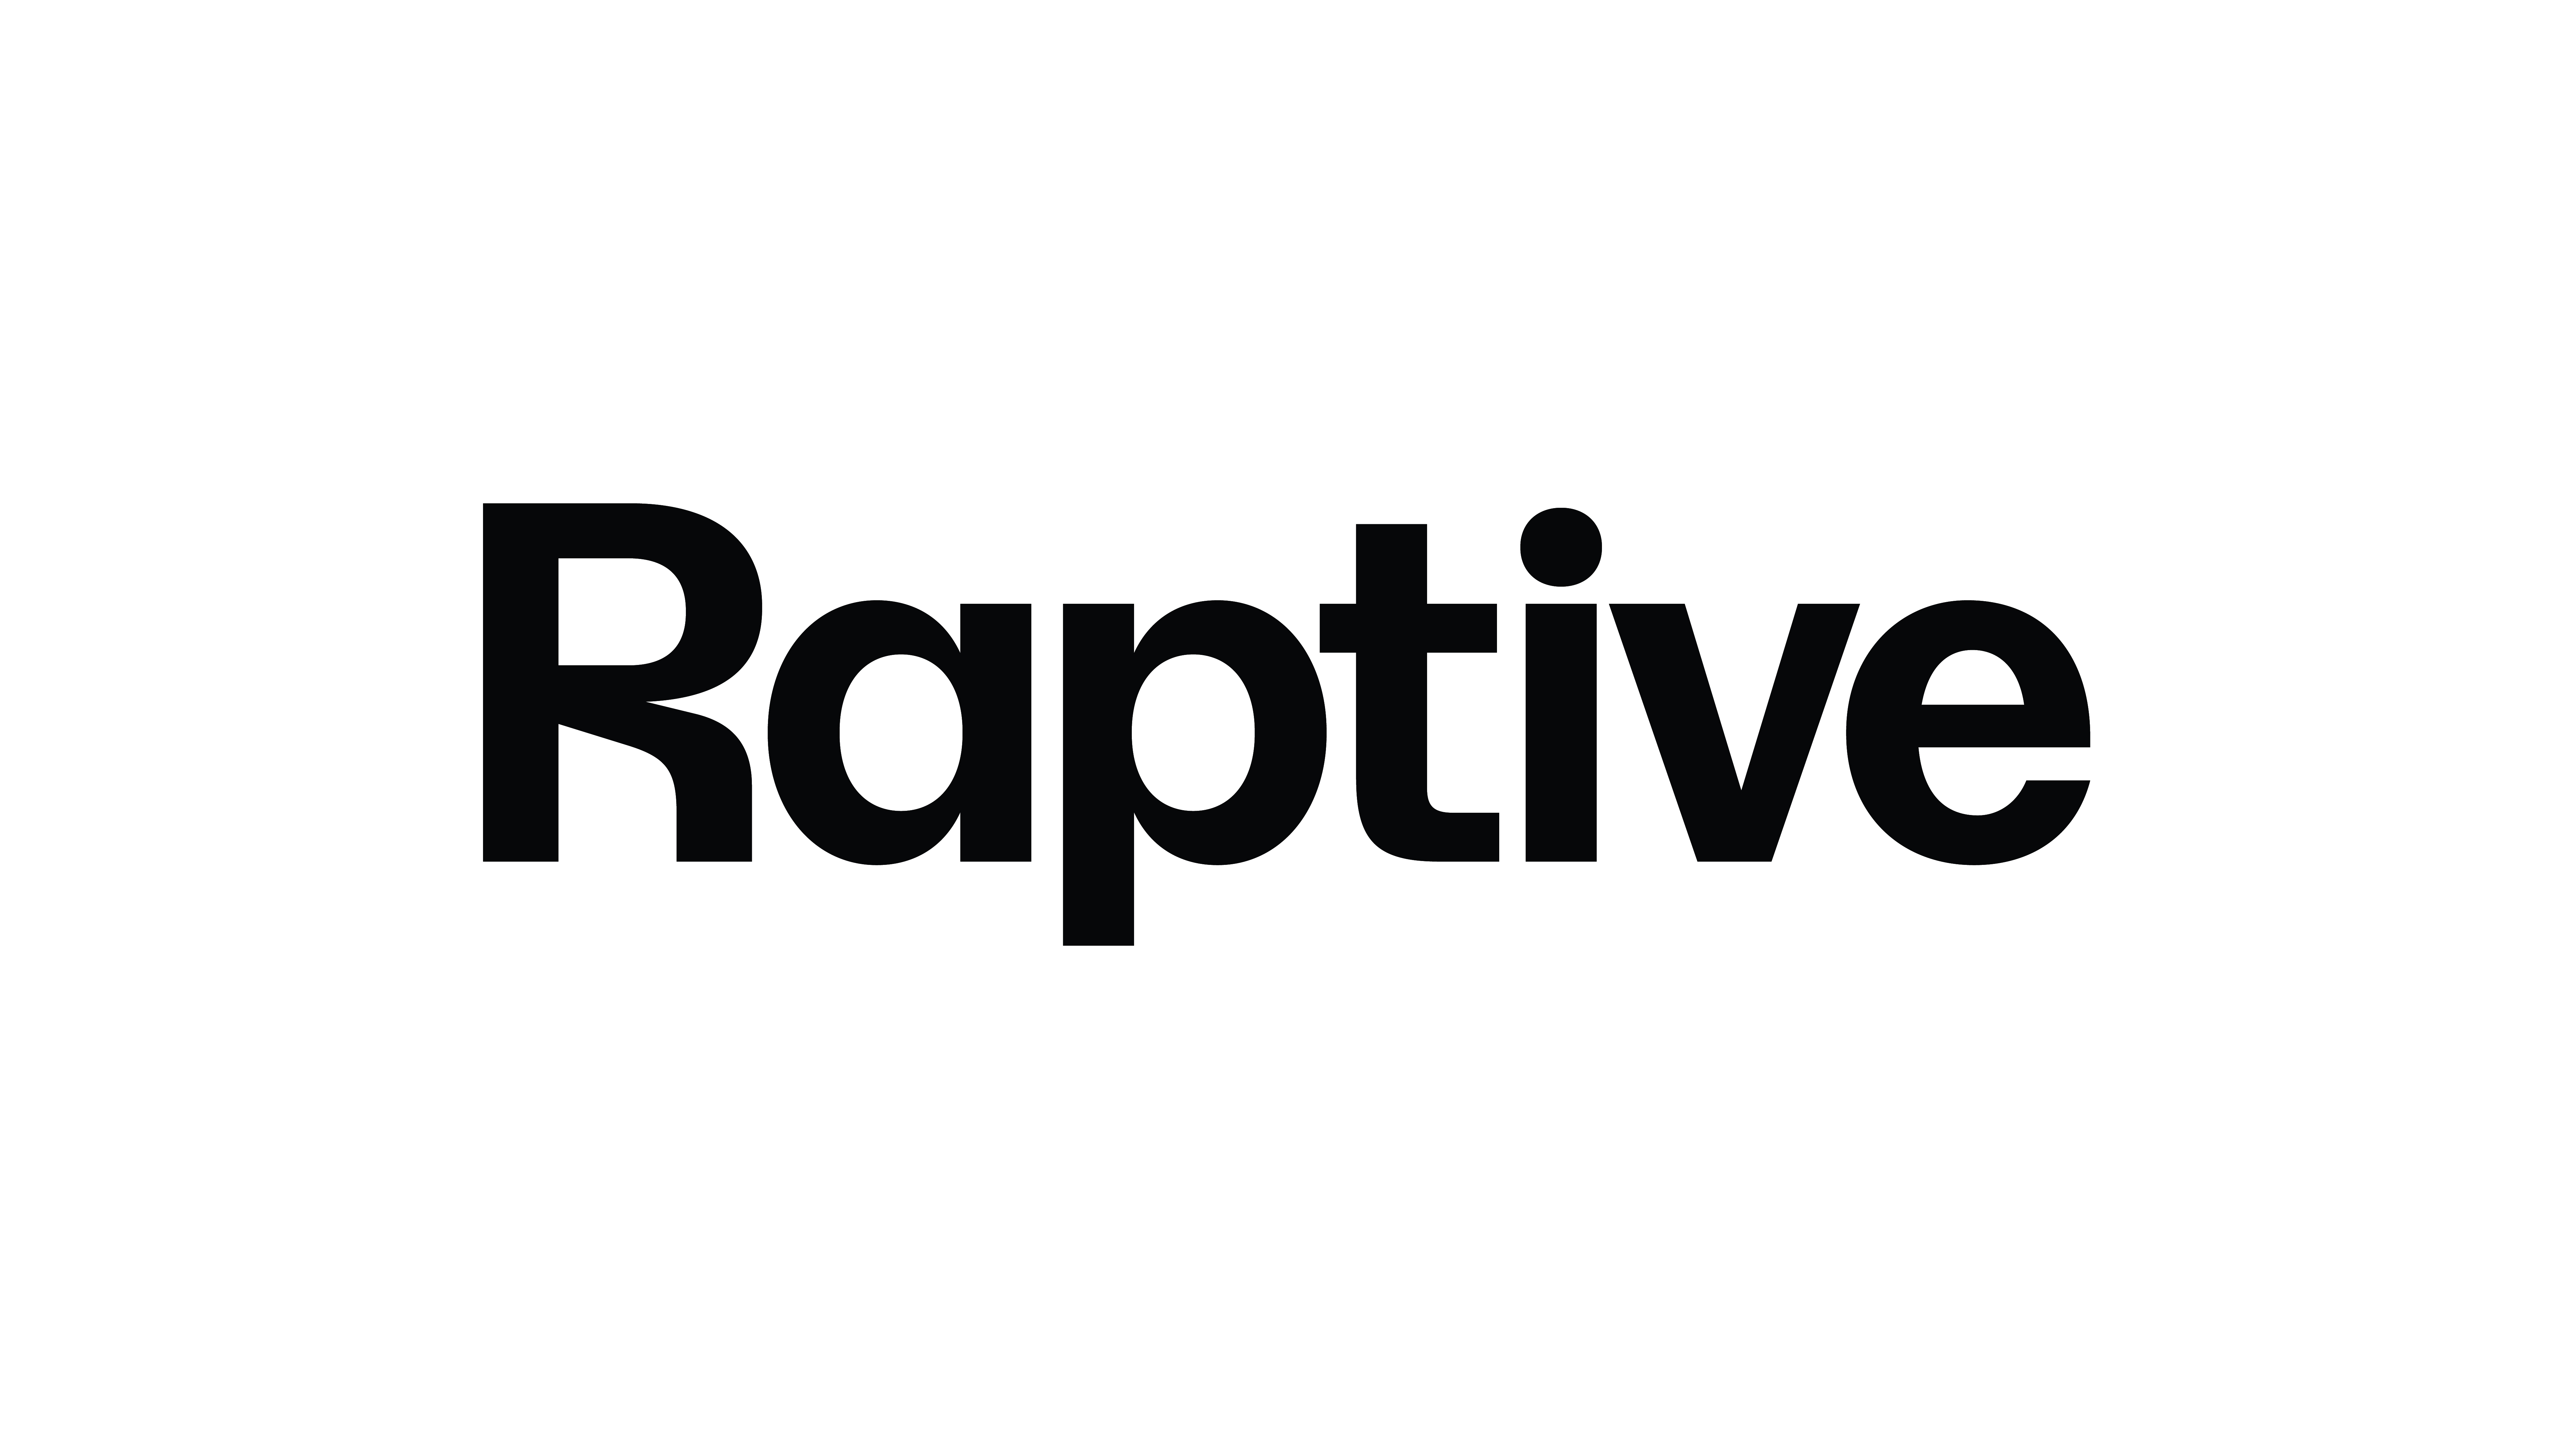 CafeMedia and AdThrive are now Raptive, a new kind of creator company